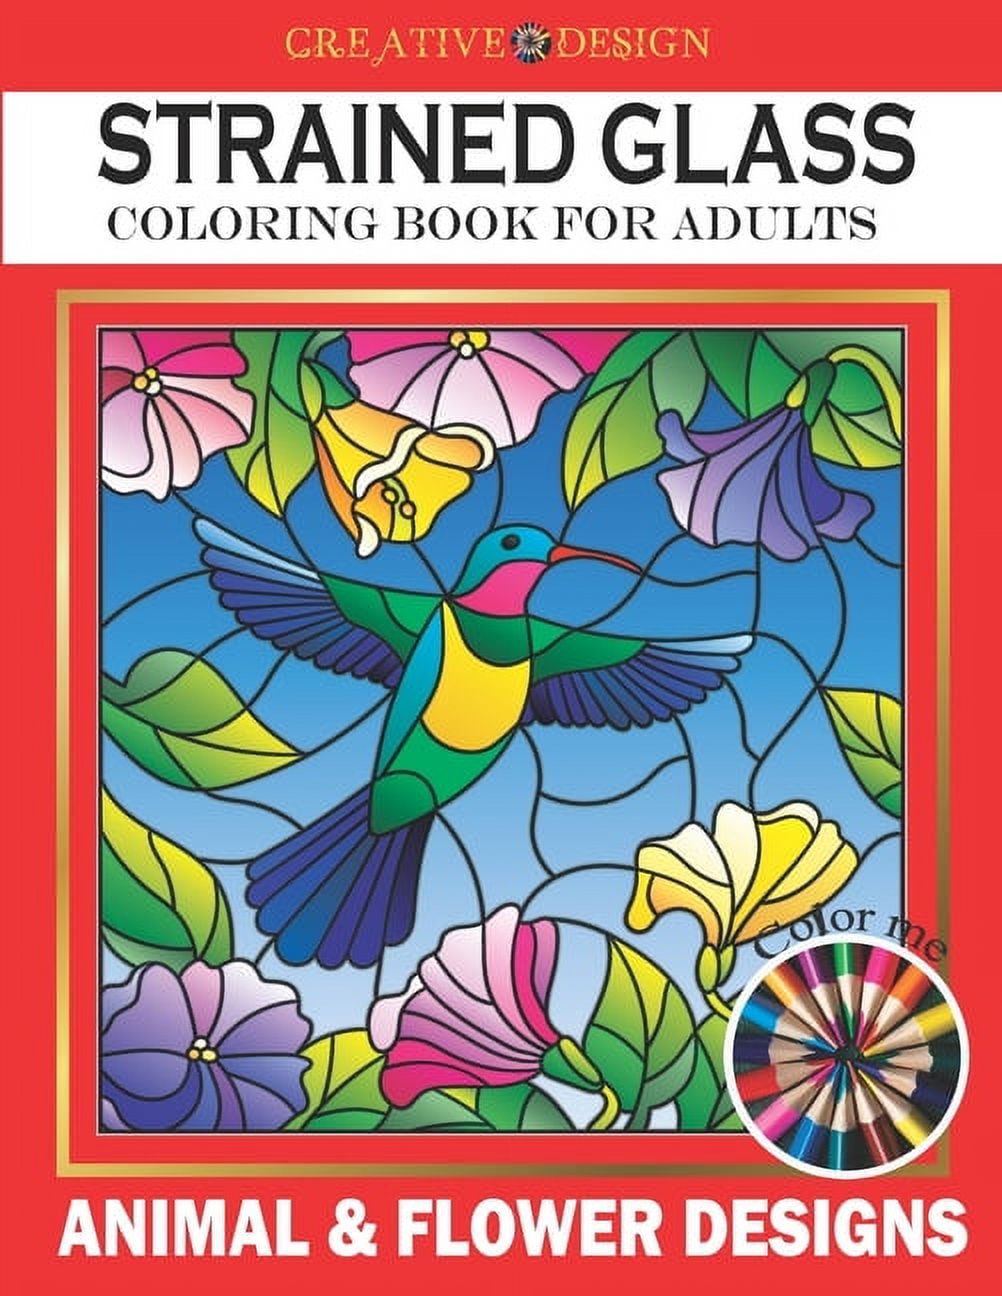 Adult Coloring Books for Anxiety and Depression: 300 Beautiful  Stained-glass Owl Portrait Coloring Pages: Find Comfort in 300 Beautiful  Stained-Glass Owl Portrait Coloring Pages by Fluffy Wolf Publishing